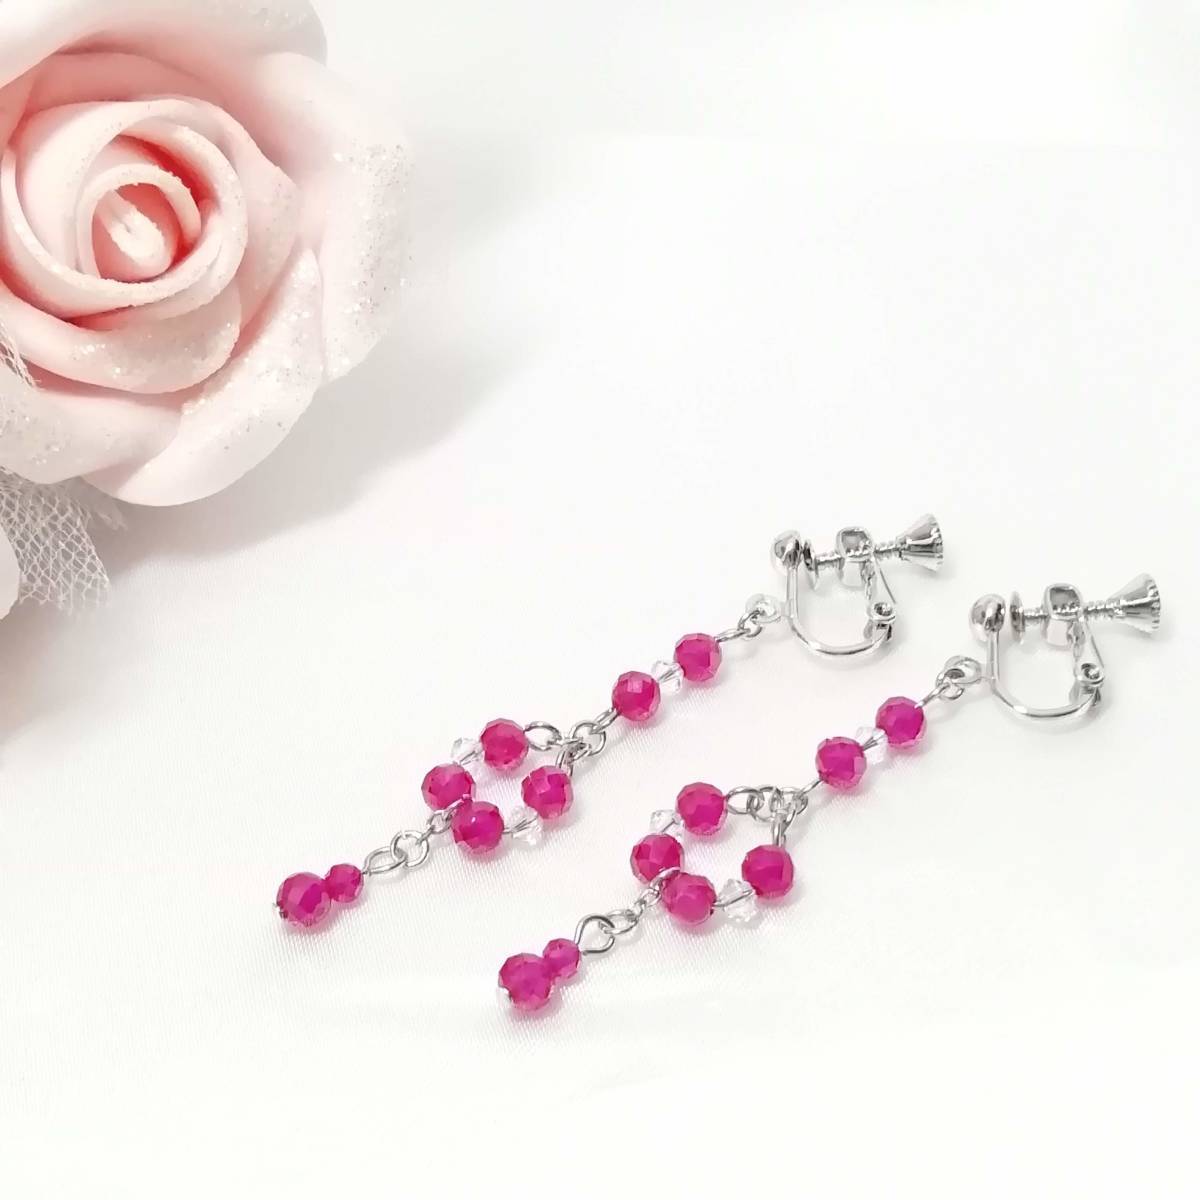 Handmade synthetic ruby and crystal earrings★Ruby/Elegant/Silver/Red/Simple/Synthetic/Crystal/Swarovski, Women's Accessories, Earrings, beads, Glass